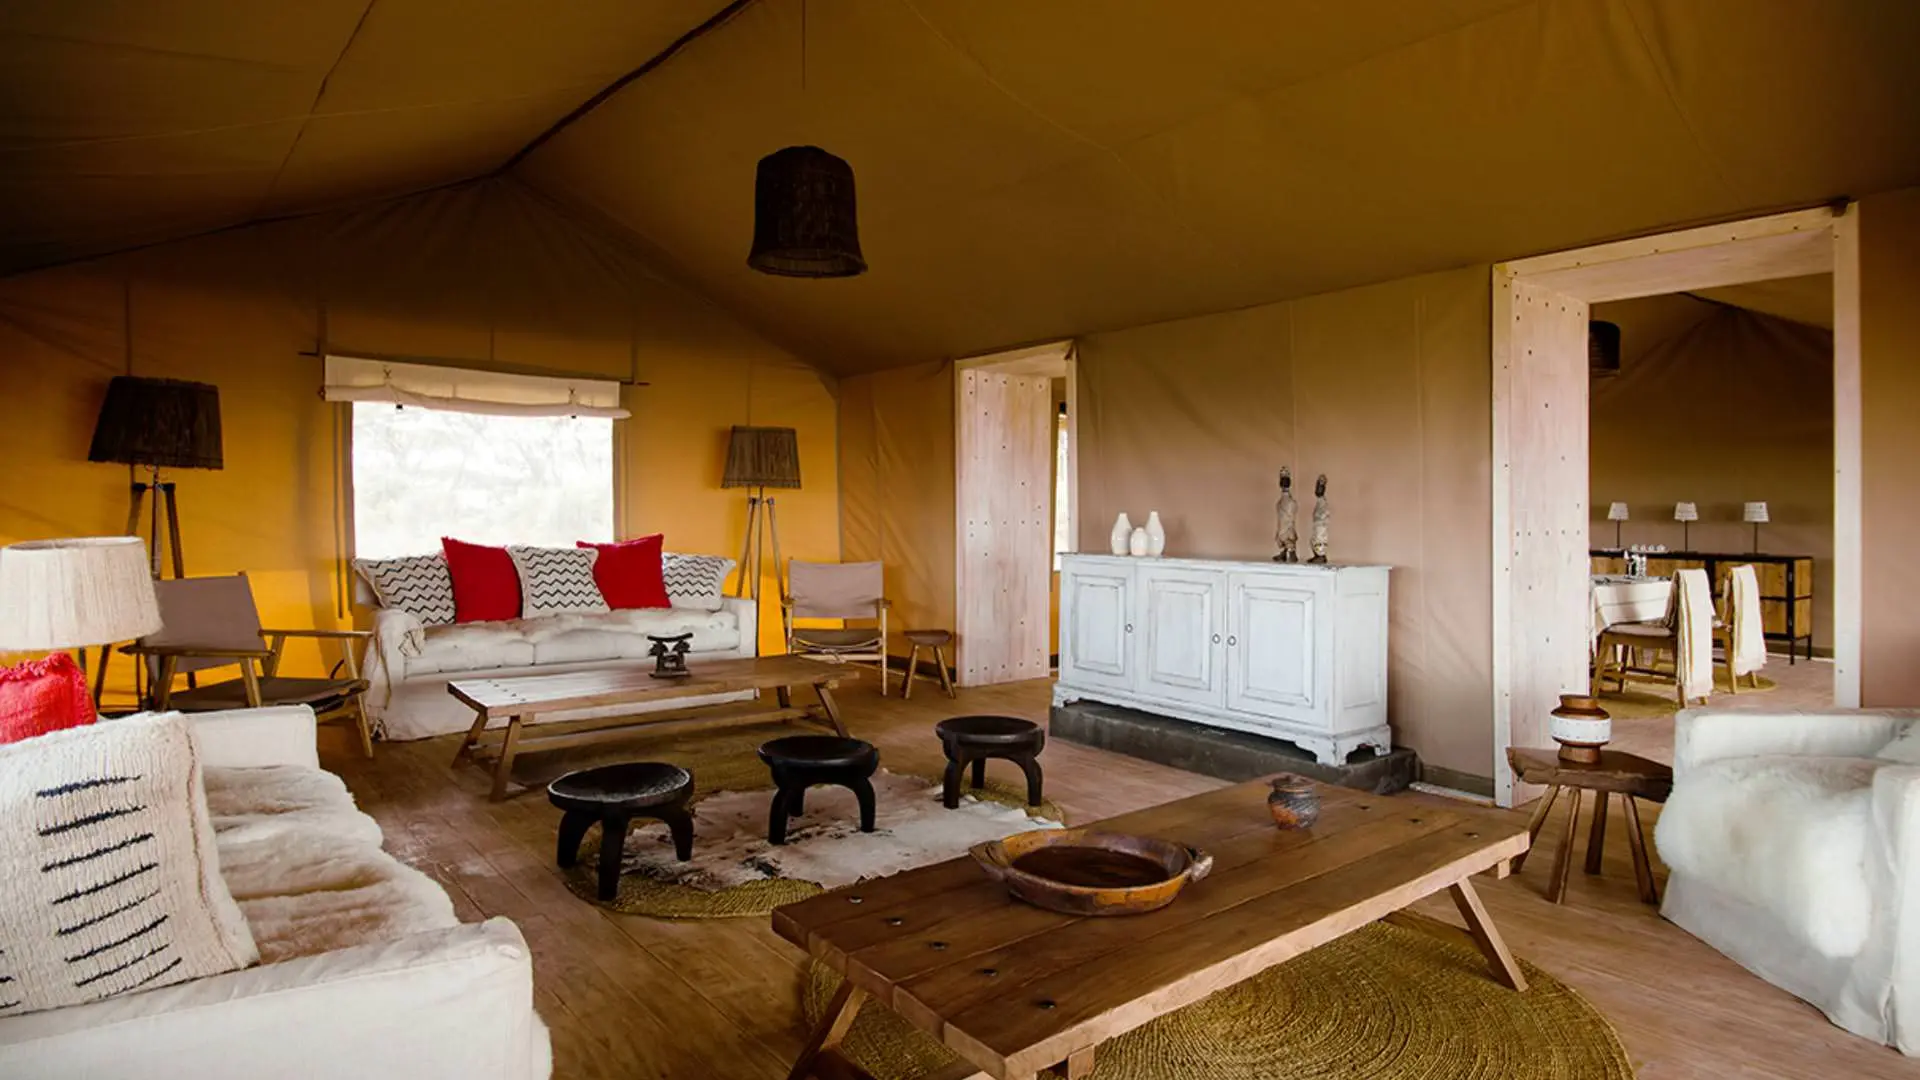 Accommodation choices range from safari lodges to bush camps.